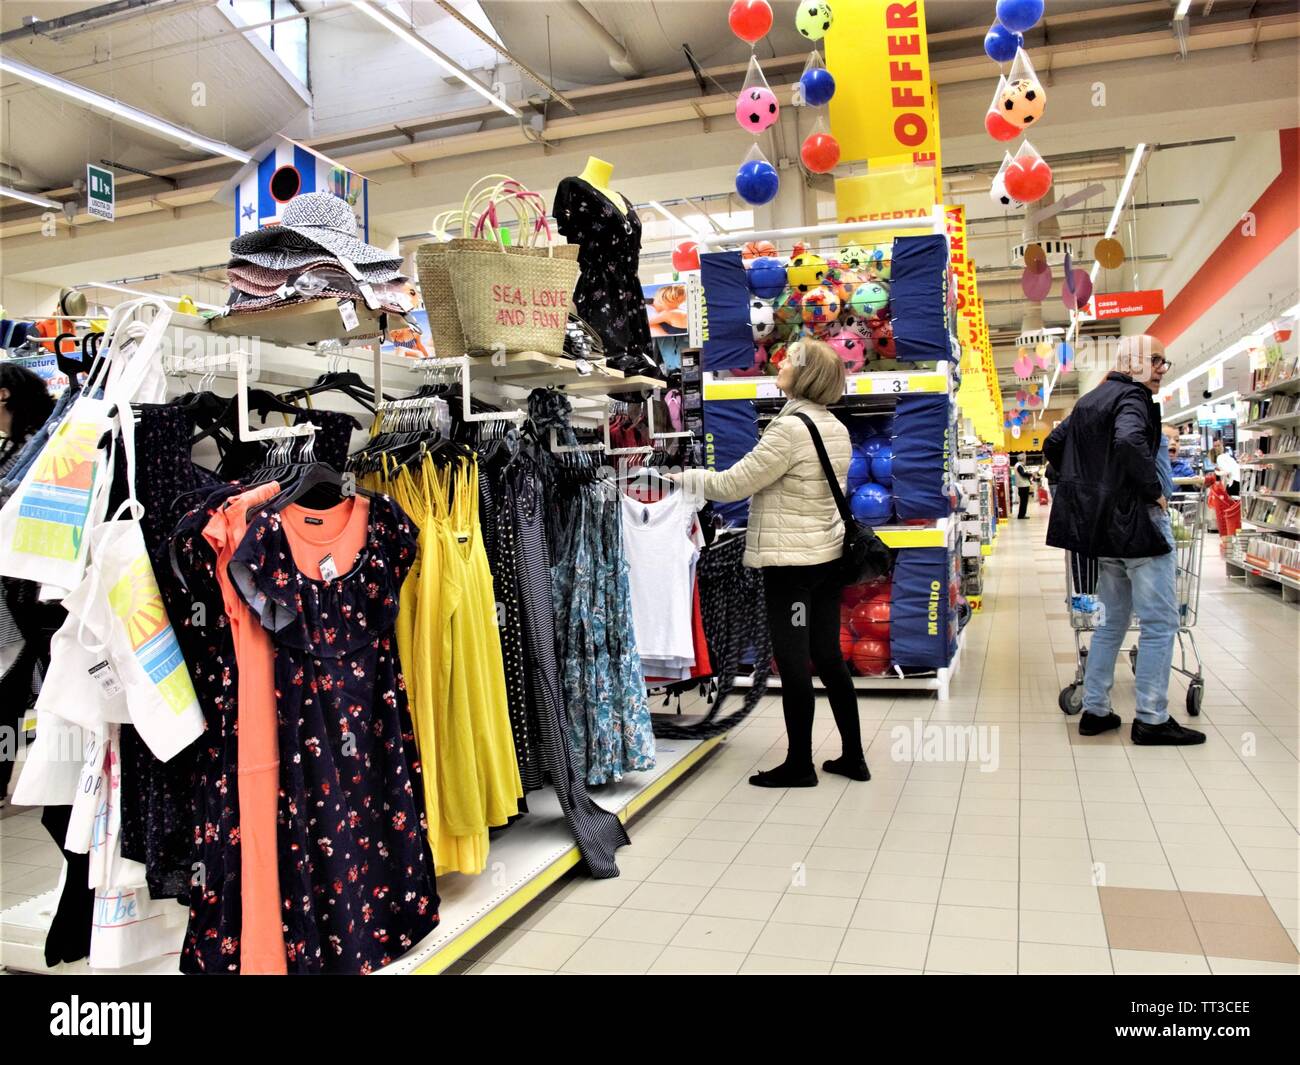 People inside at the Auchan supermarket in Rome Stock Photo - Alamy